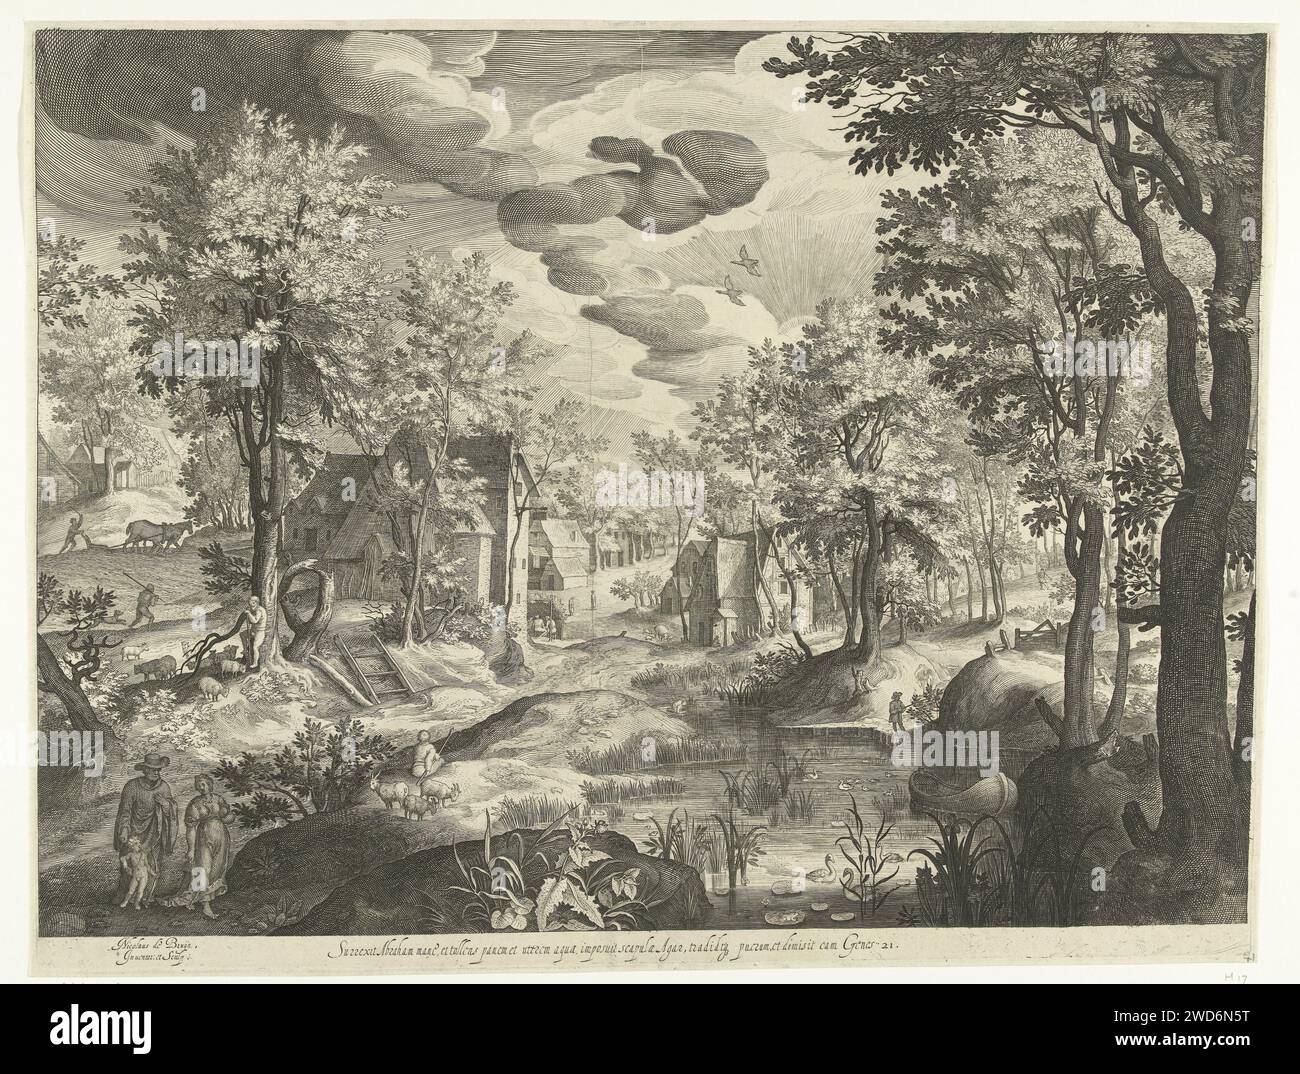 Landscape with Hagar and Ismaël, Nicolaes de Bruyn, 1581 - 1656 print Landscape with Hagar and Ismaël on their way with Waterbuik and Bread after they have been driven out by Abraham. In the margin under a quote from Bible text Gen 21 in Latin. Netherlands paper engraving Hagar and Ishmael (often with bow and arrow) depart. mountains Stock Photo